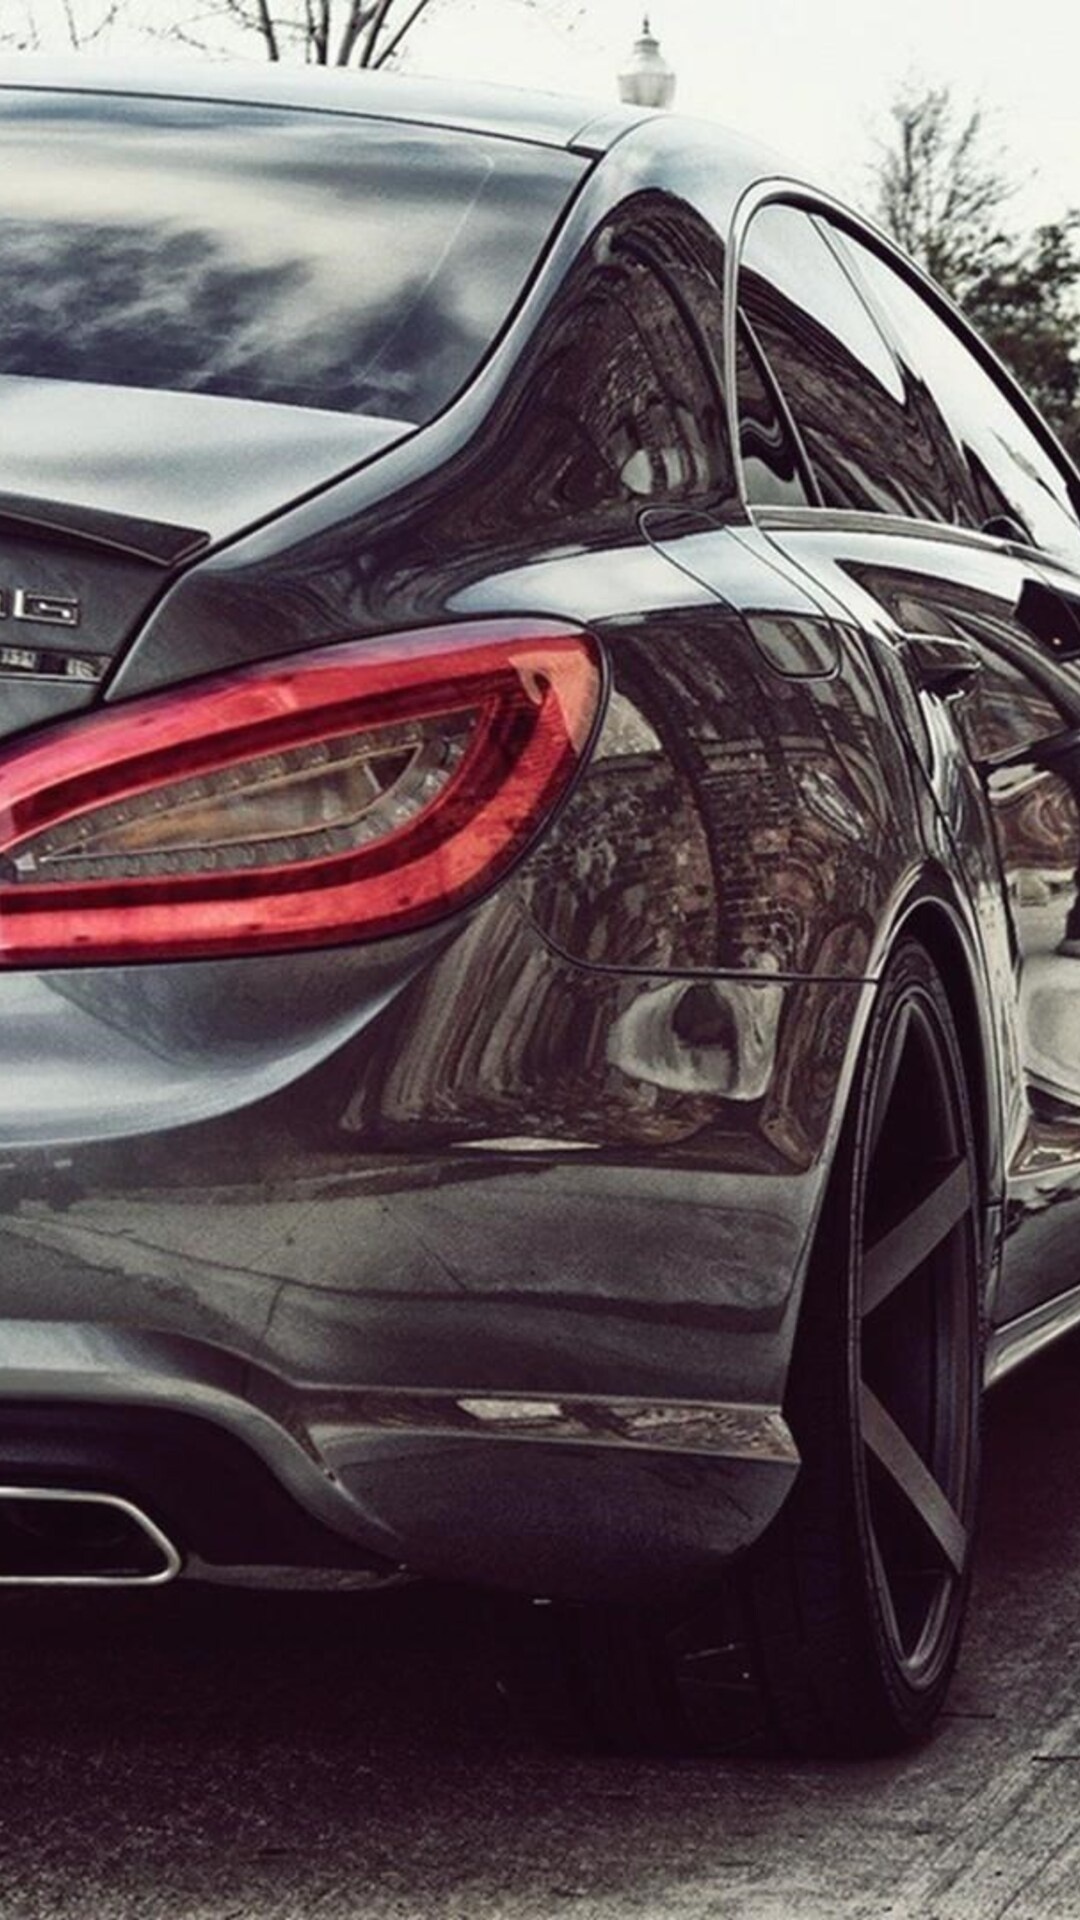 Mercedes CLS tail light, iPhone 7, 6S, Pixel XL, High-resolution wallpapers, 1080x1920 Full HD Phone